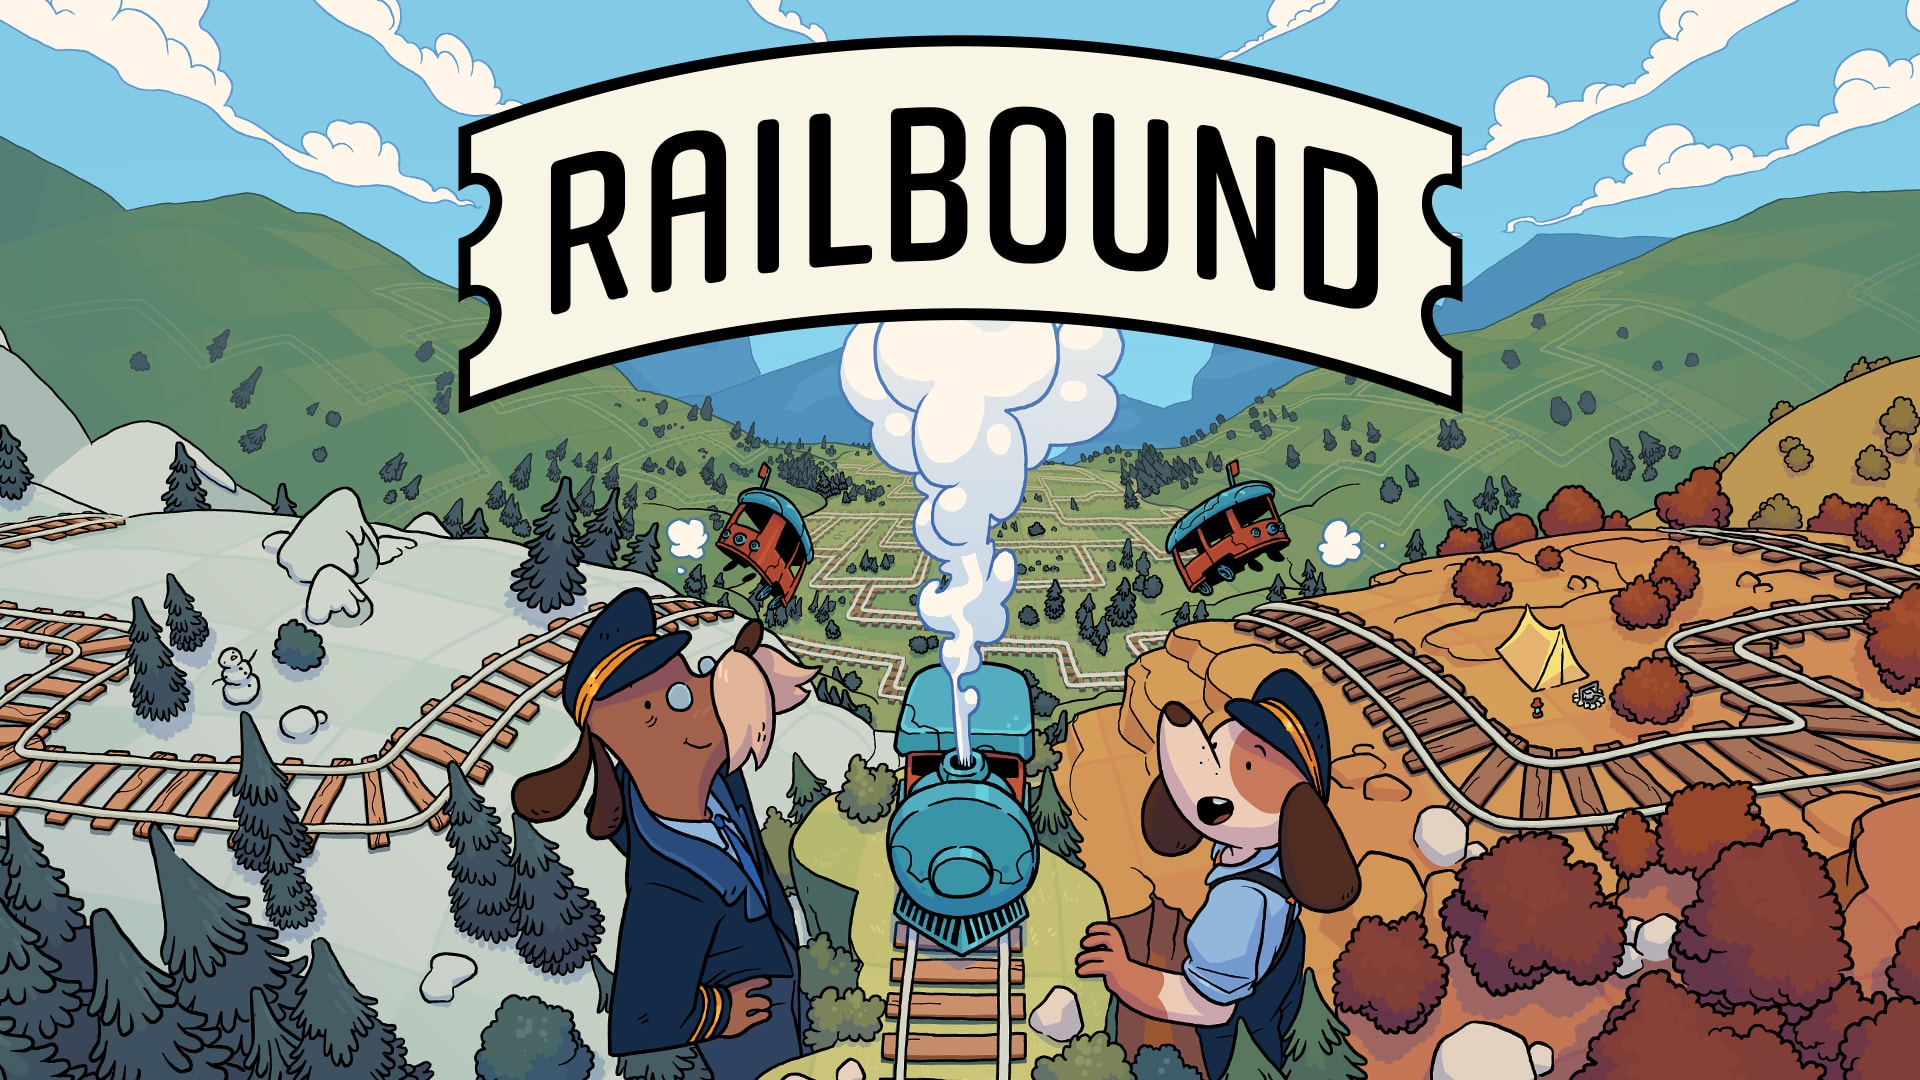 Look at that face! But can you pet them? - Railbound